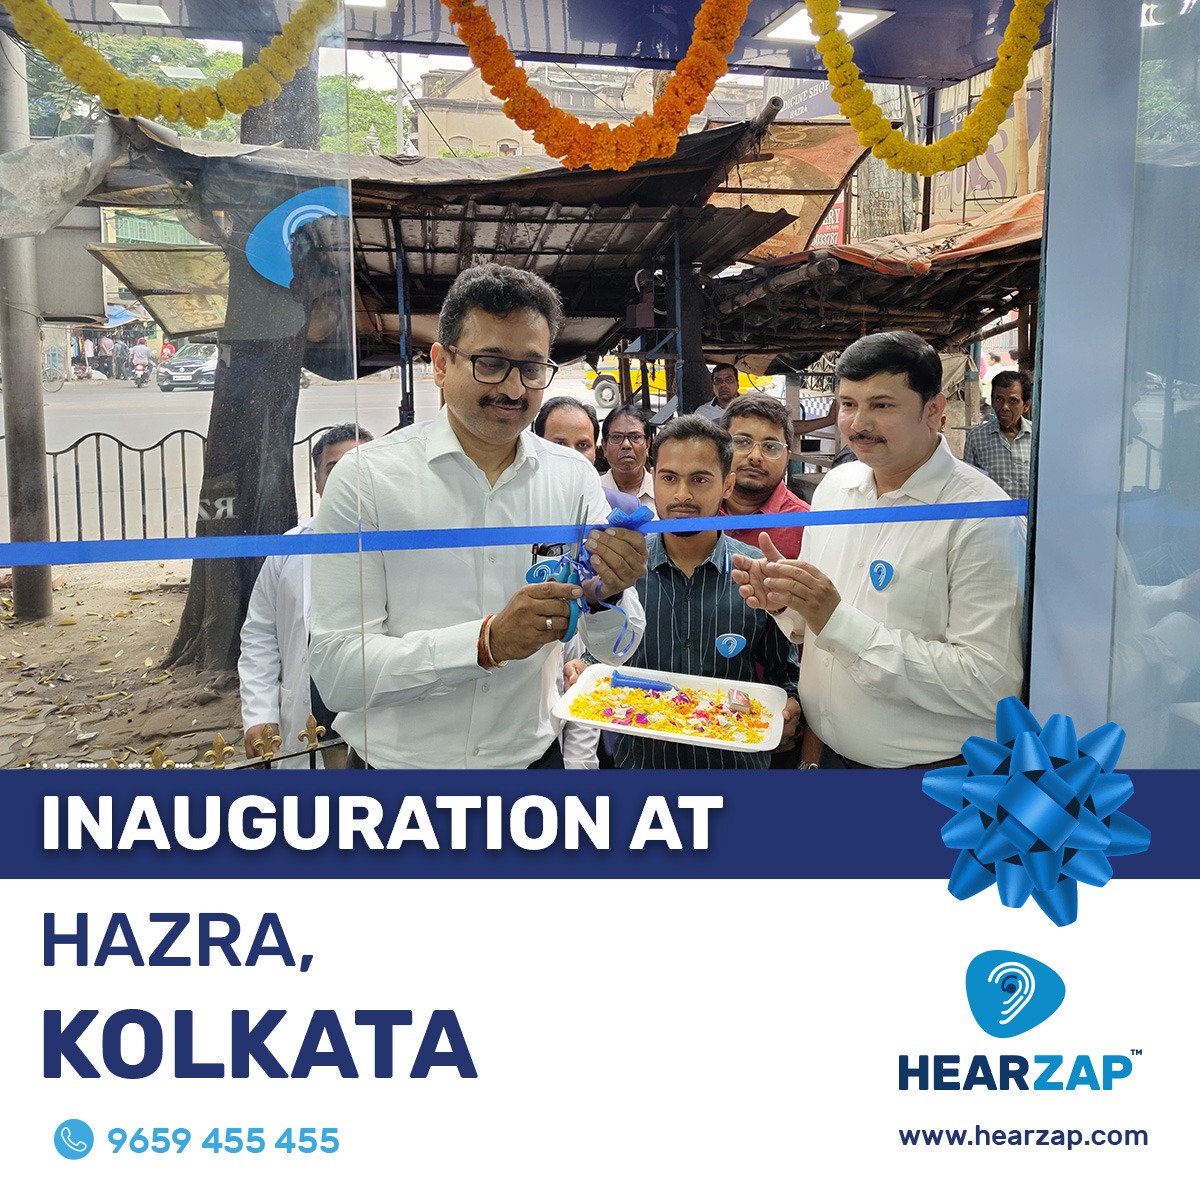 Embark on a short journey to Hearzap at Hazra for crystal-clear hearing. Our doors are now open at 67B, Shyama Prasad Mukherjee Rd, Hazra, Kalighat, Kolkata, West Bengal 700026.